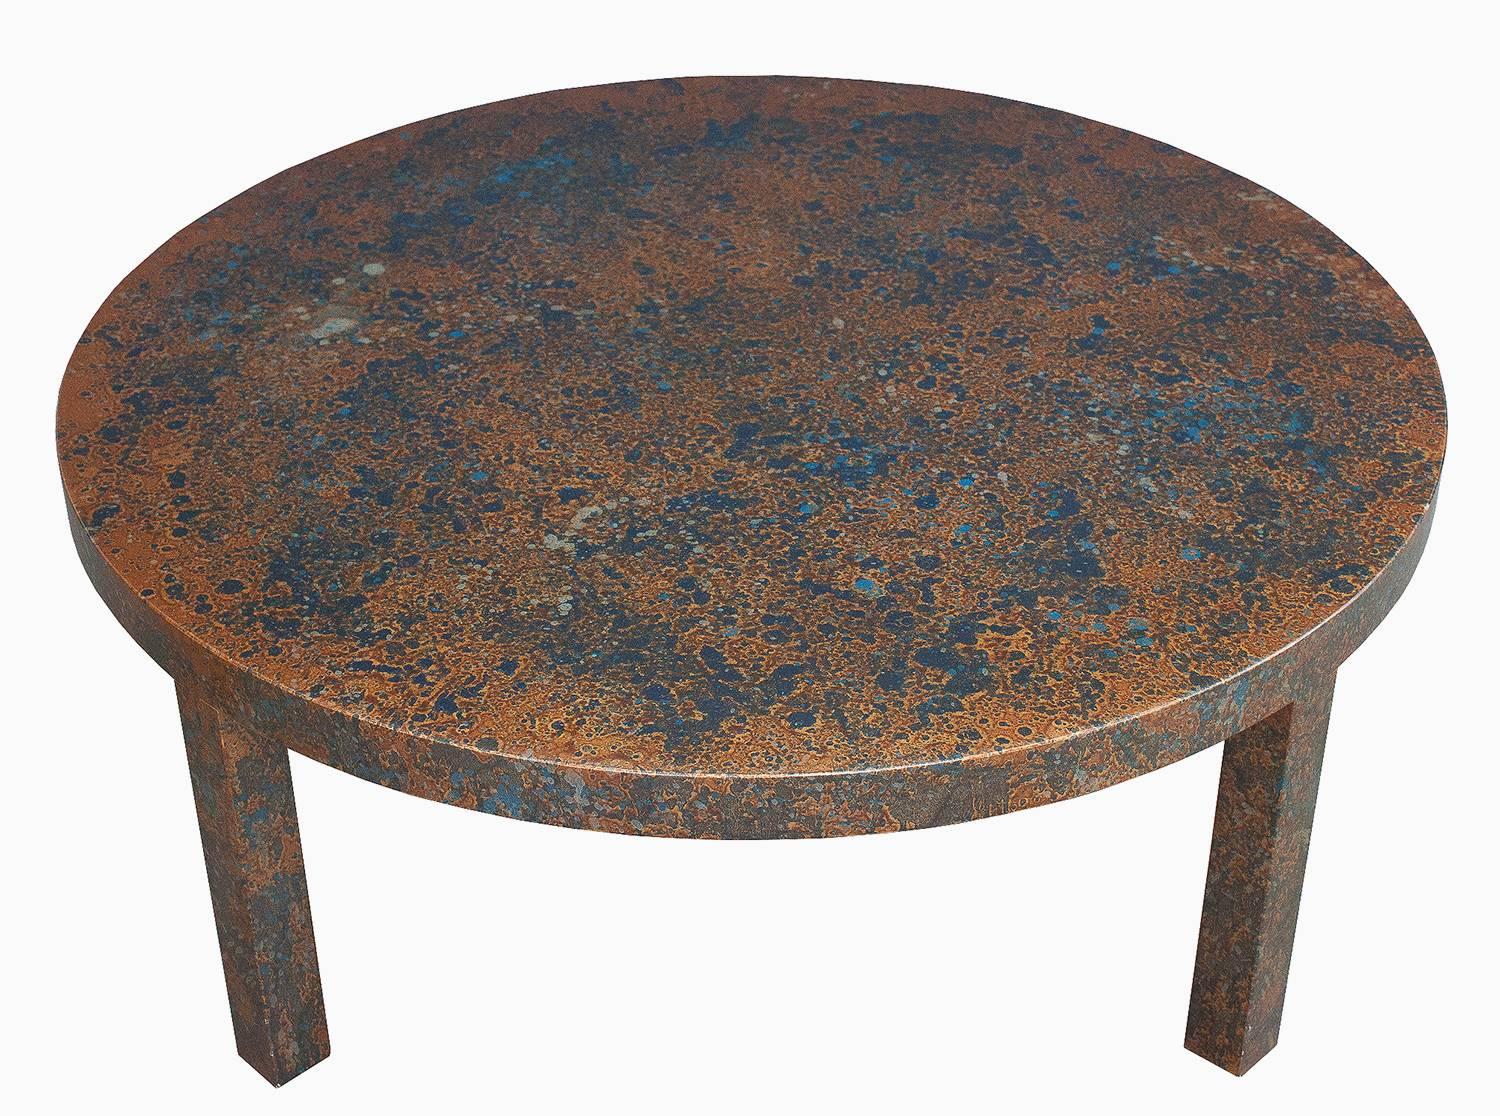 Uncommon Parsons style round coffee table with a very unique lacquer finish of metallic gold, copper and cobalt blue spots. Four 2